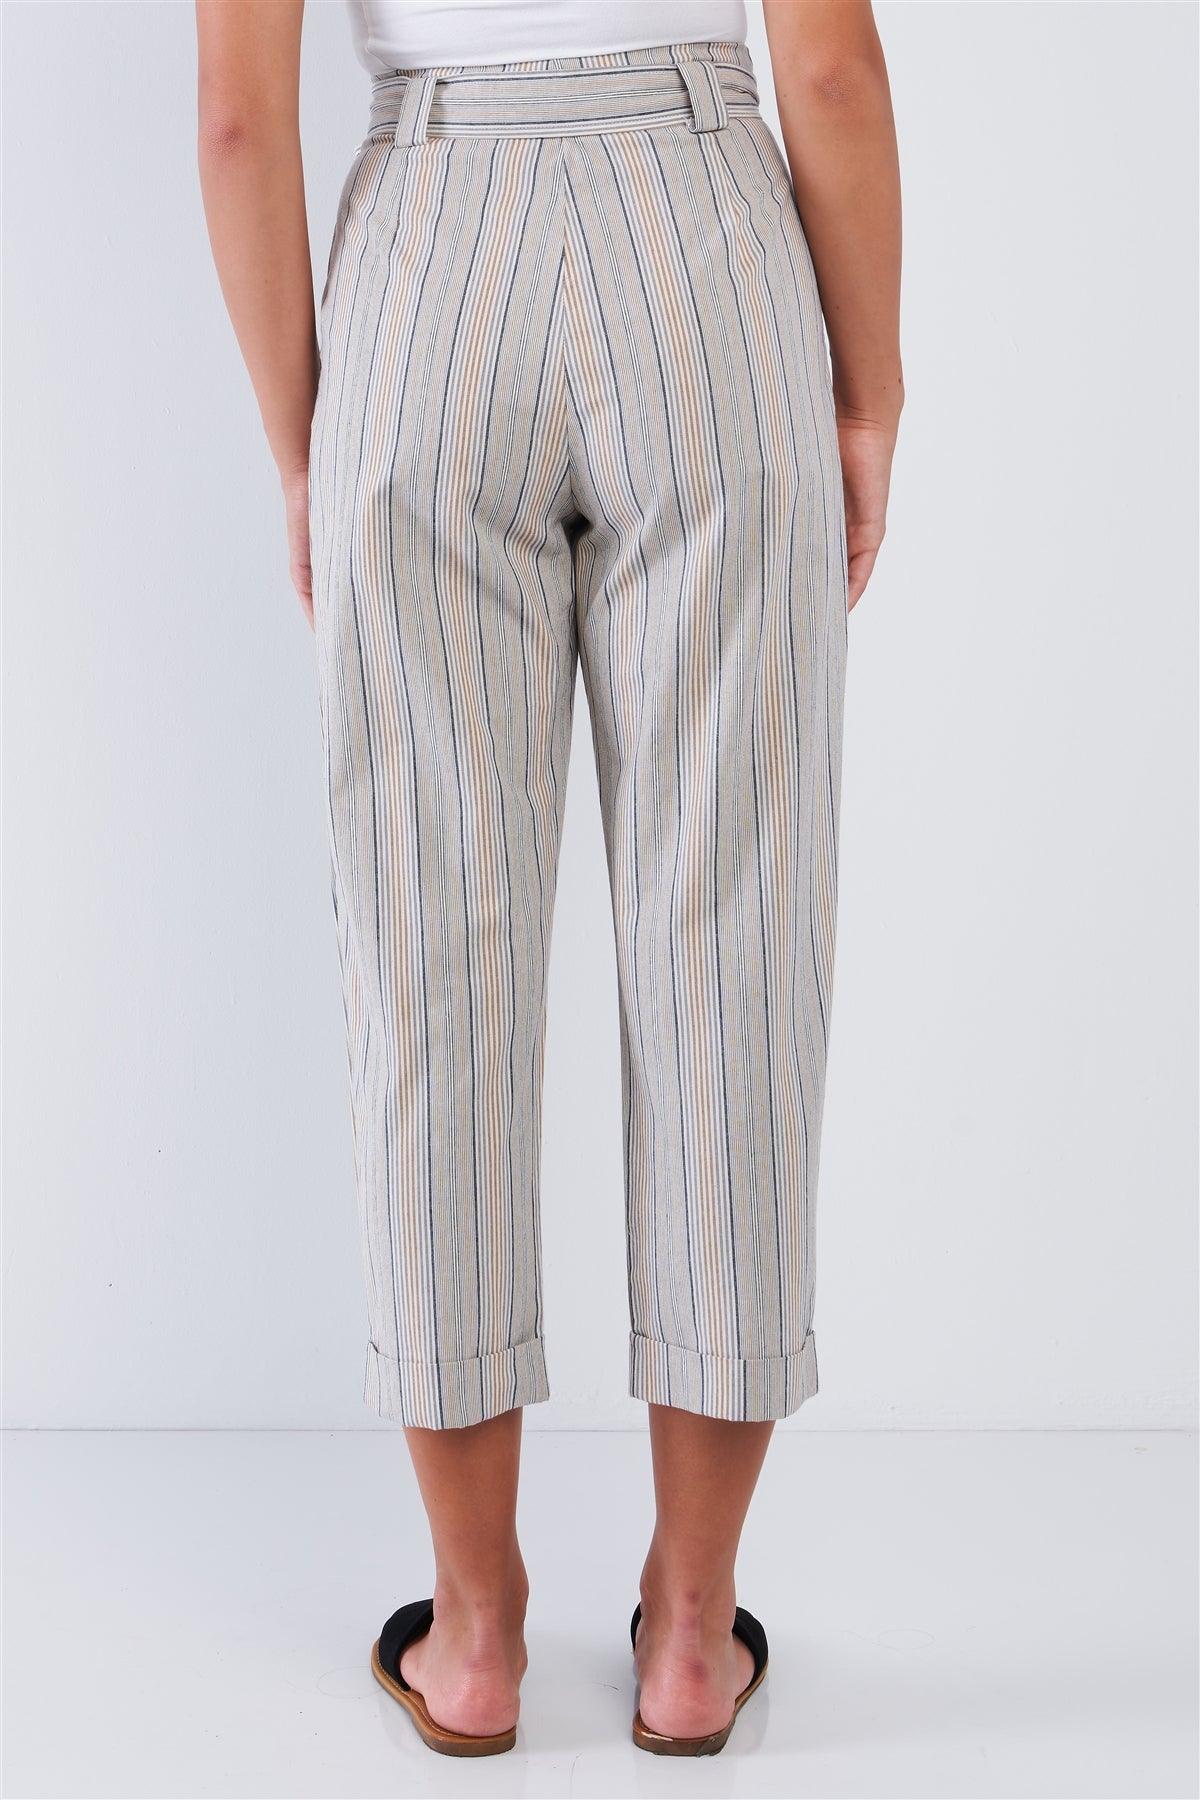 Natural Navy Taupe Striped High Waisted Tapered Folded Hem Pant